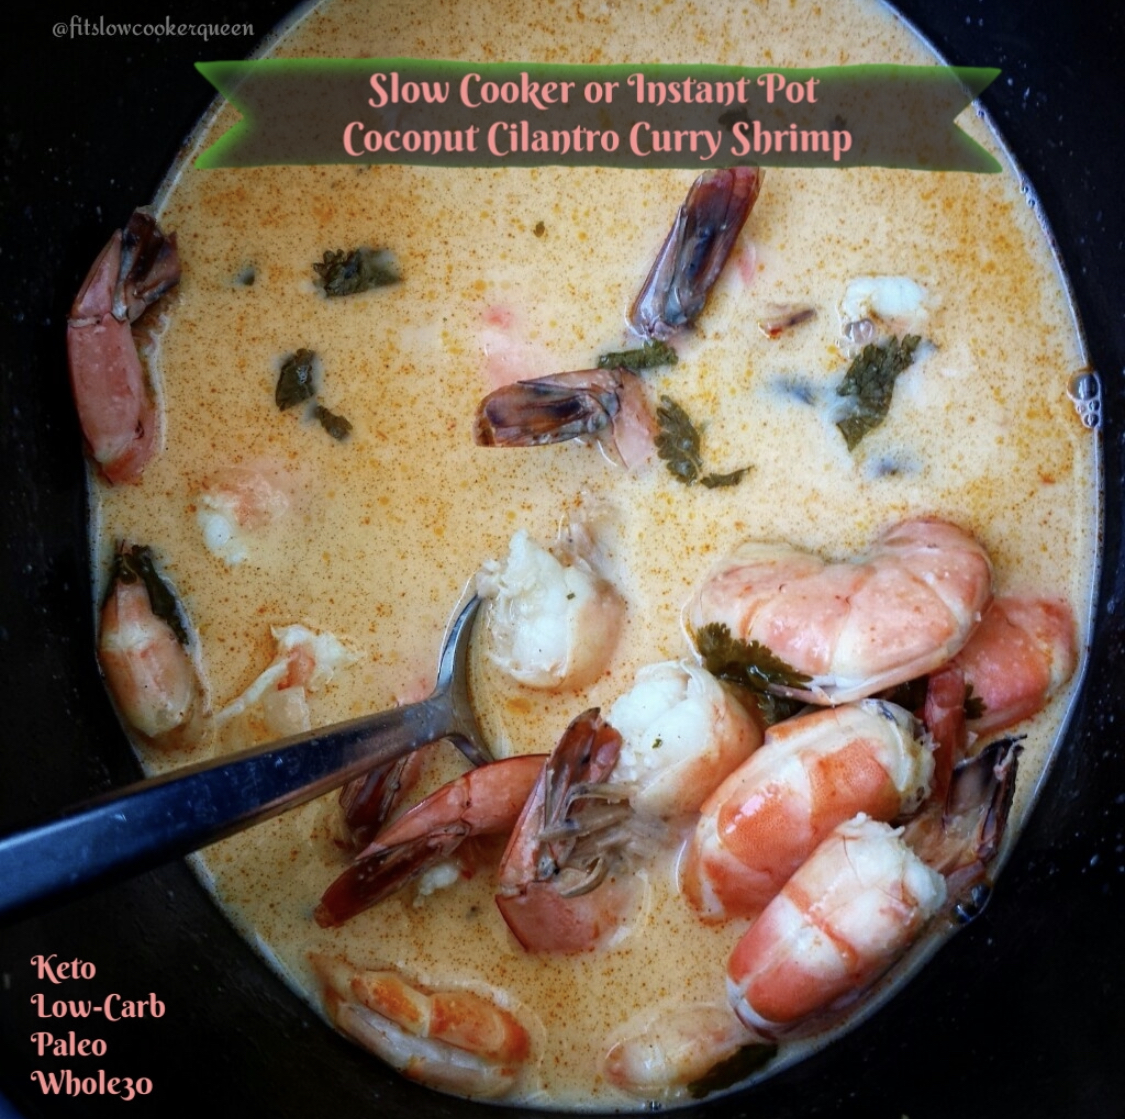 There are only a few ingredients in this easy shrimp recipe, mainly including coconut, cilantro and curry. Make this low-carb, keto, paleo, and whole30 recipe in your slow cooker or Instant Pot.